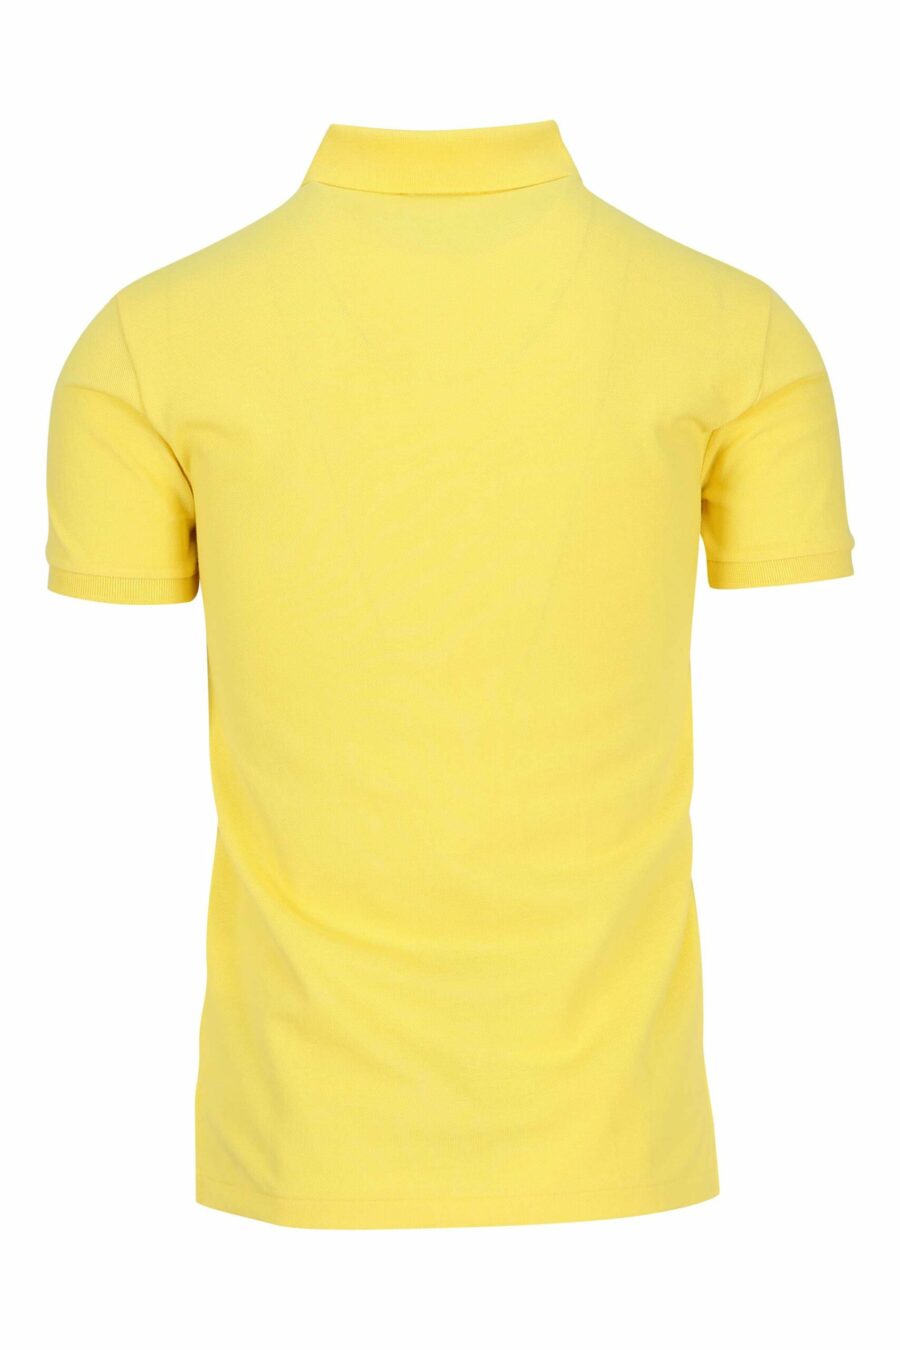 Yellow and blue T-shirt with mini-logo "polo" - 3616535972186 1 scaled